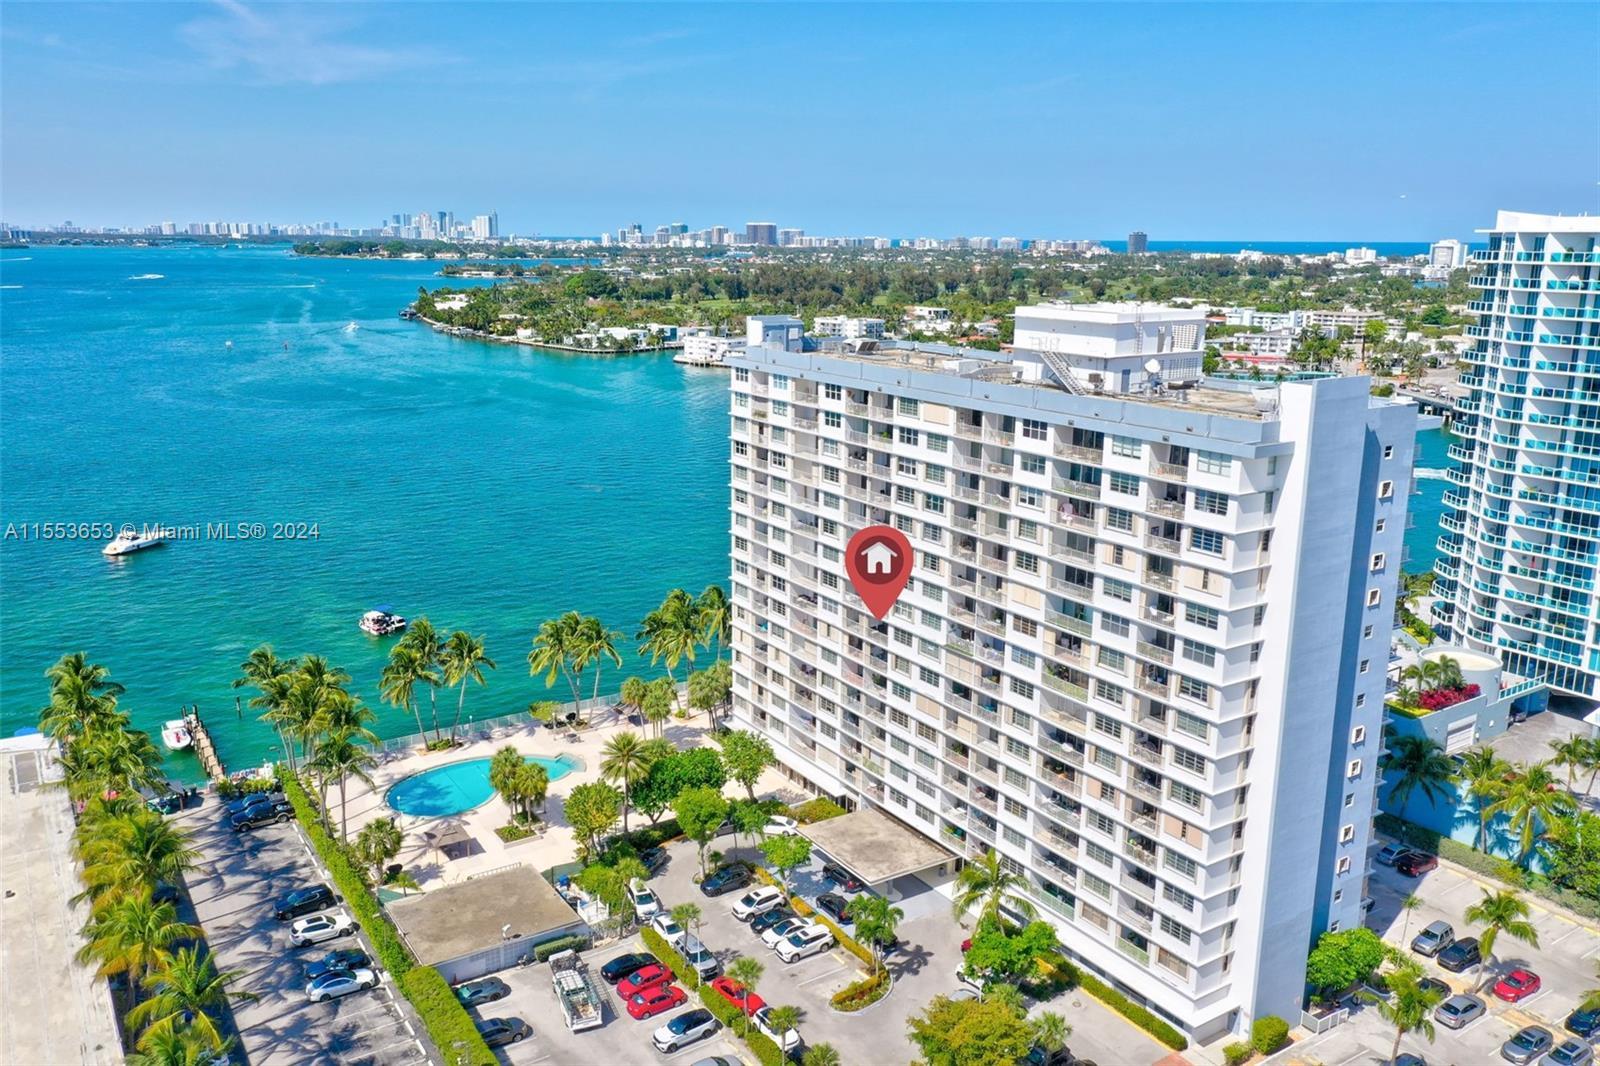 Don't miss this one! Great in every way! Great view - unobstructed view to the west and Biscayne Bay